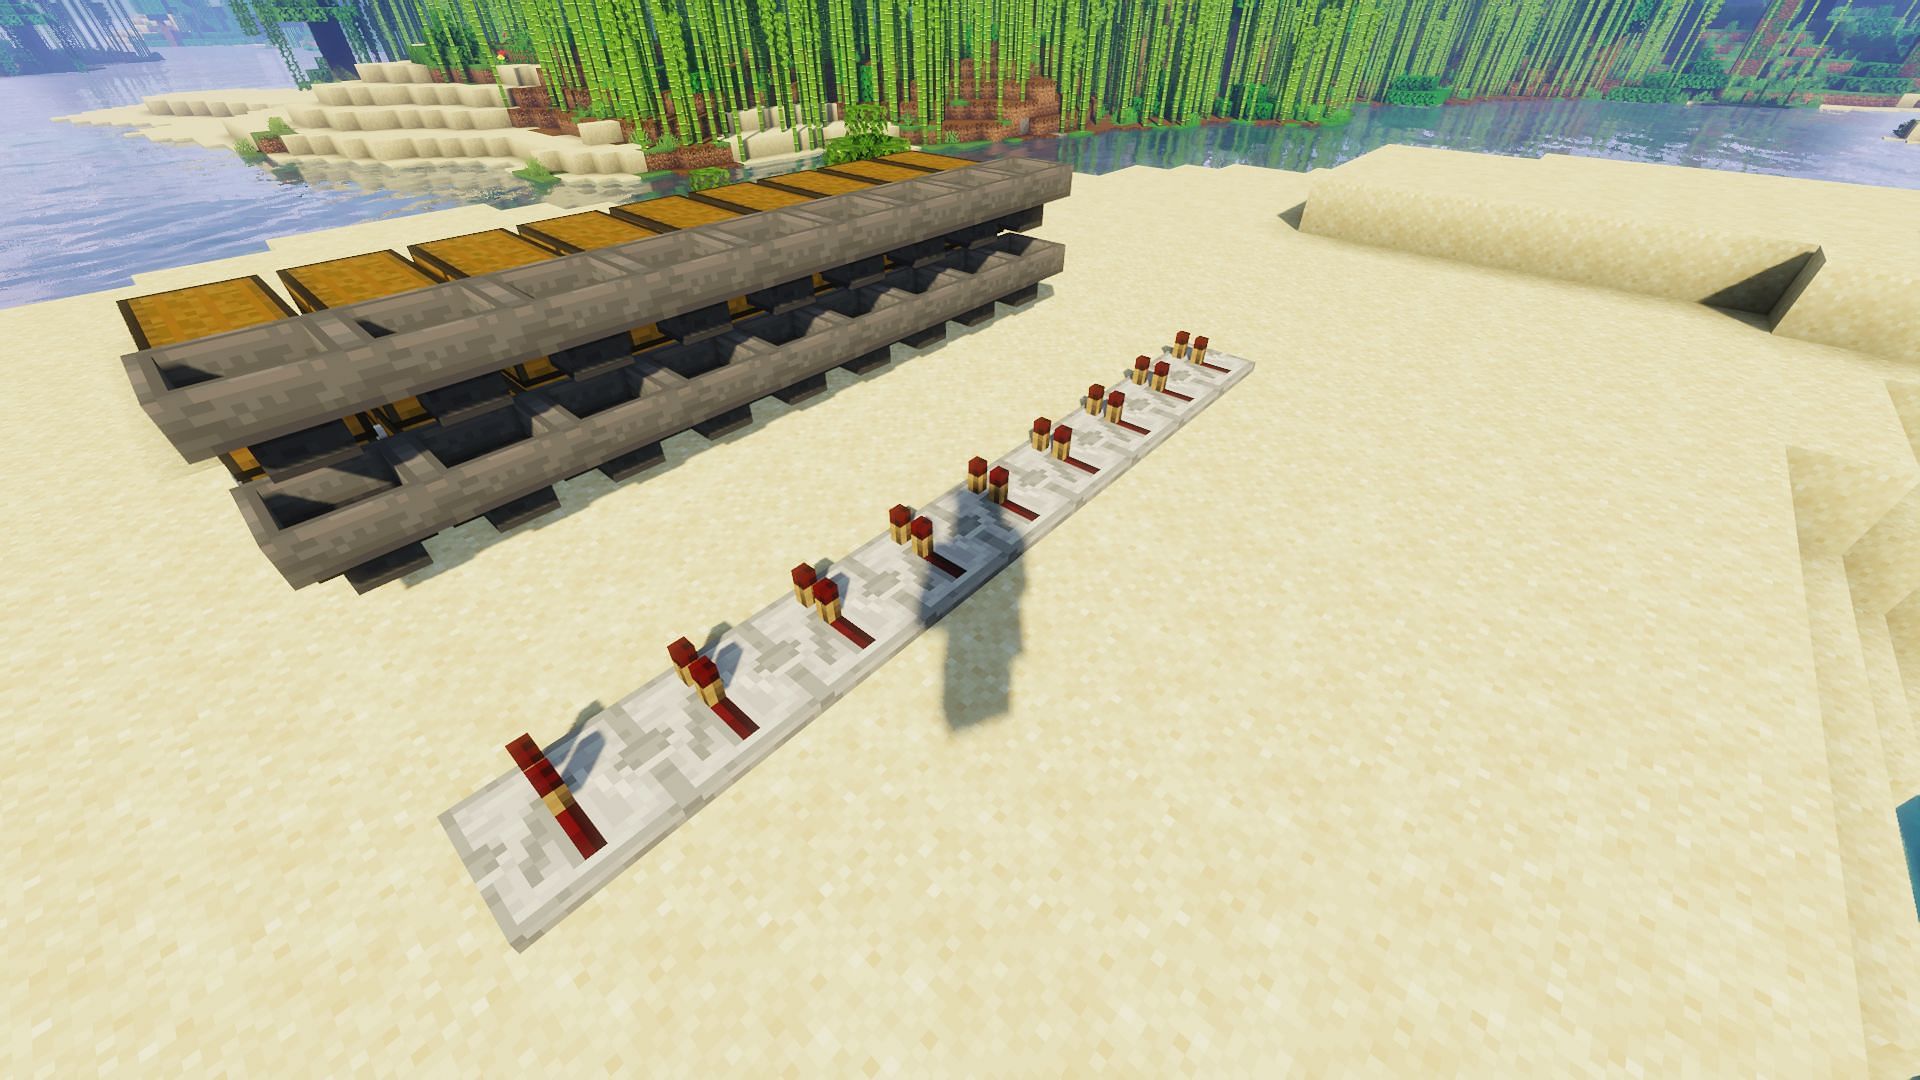 The repeaters placed a short distance from the rest of the sorter (Image via Minecraft)